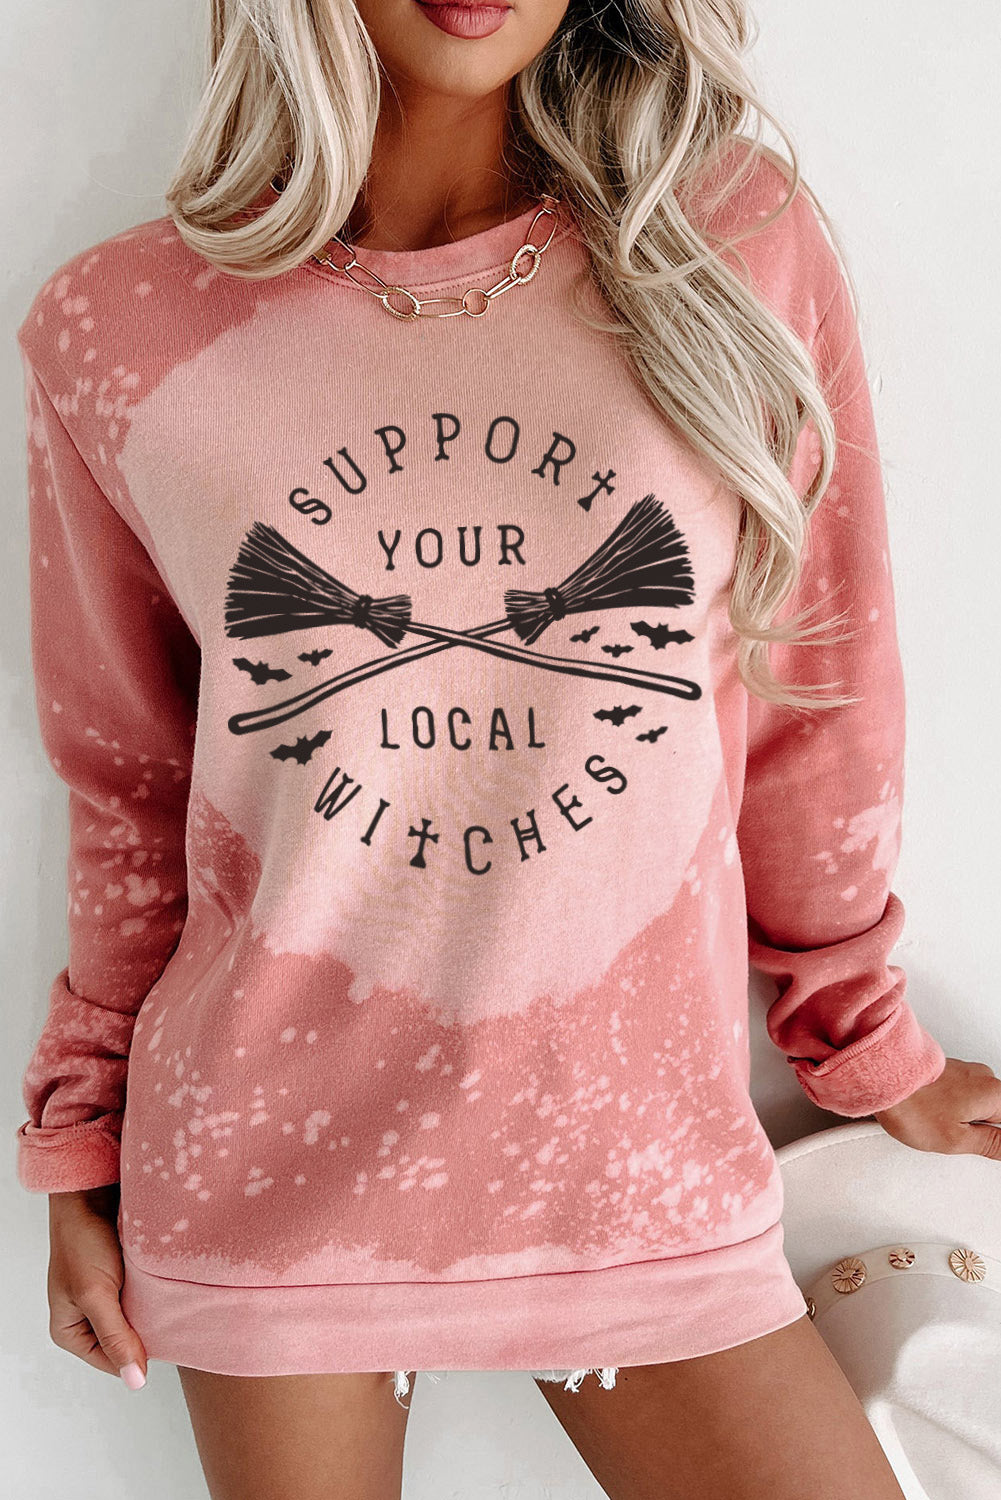 SUPPORT YOUR LOCAL WITCHES Graphic Sweatshirt BLUE ZONE PLANET